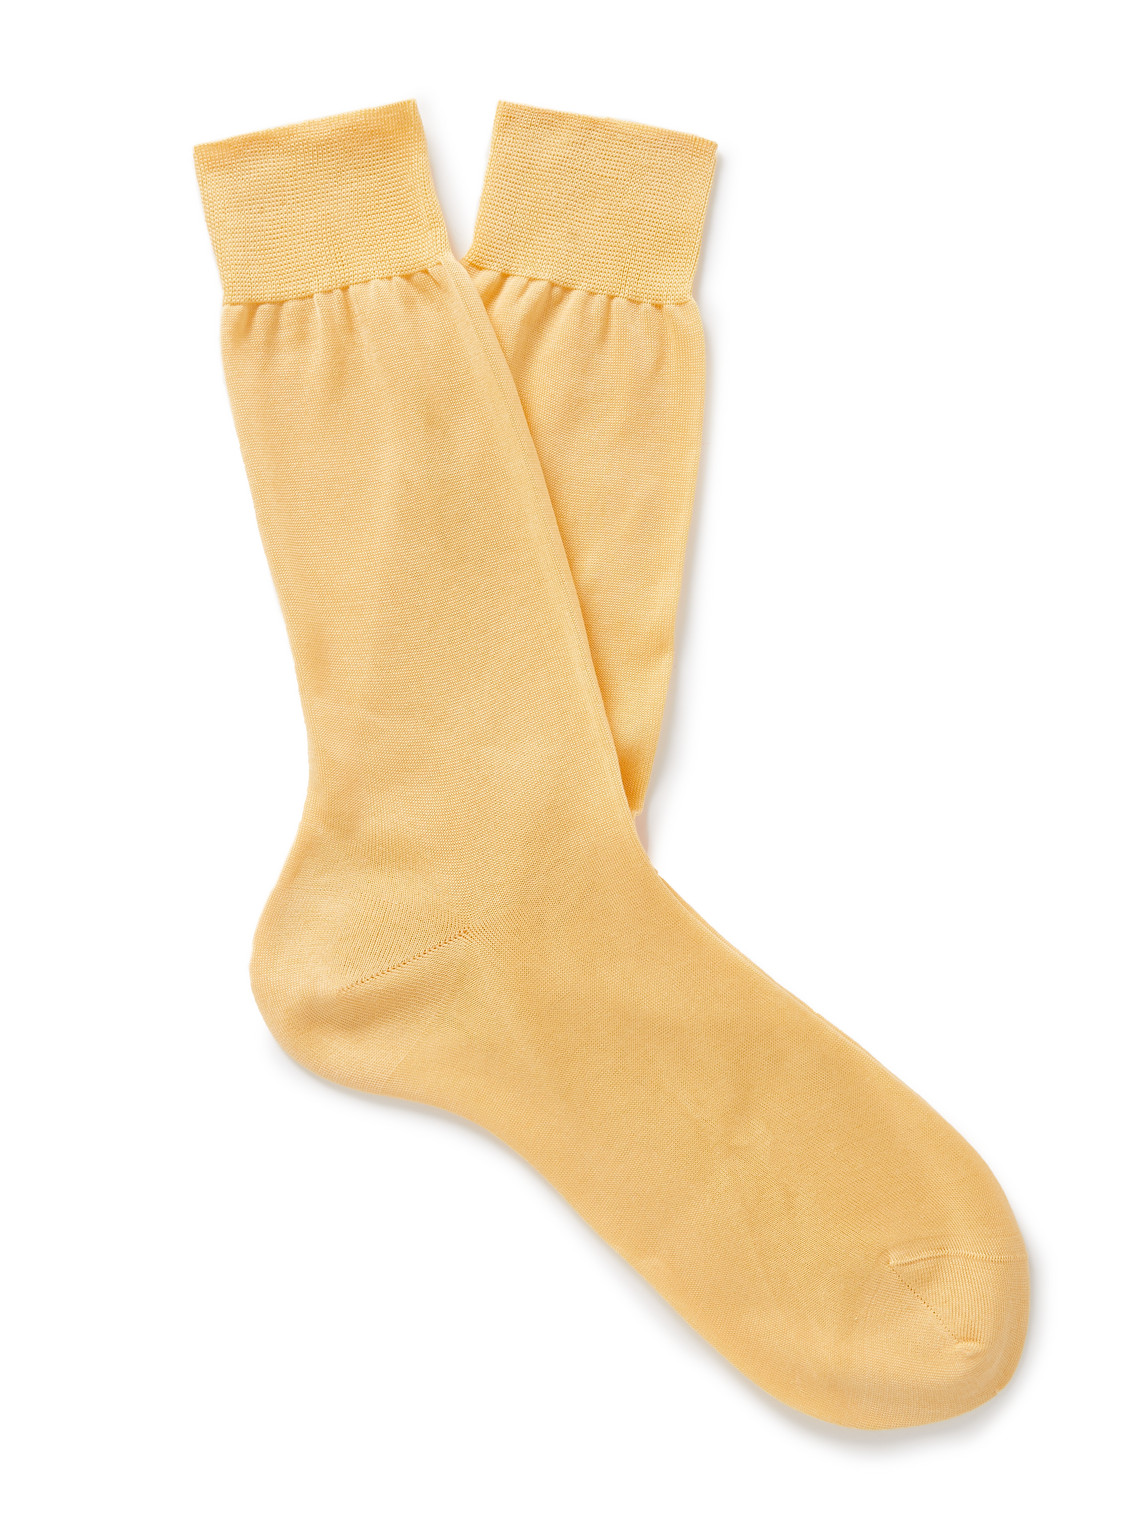 Anderson & Sheppard Cotton Socks In Yellow